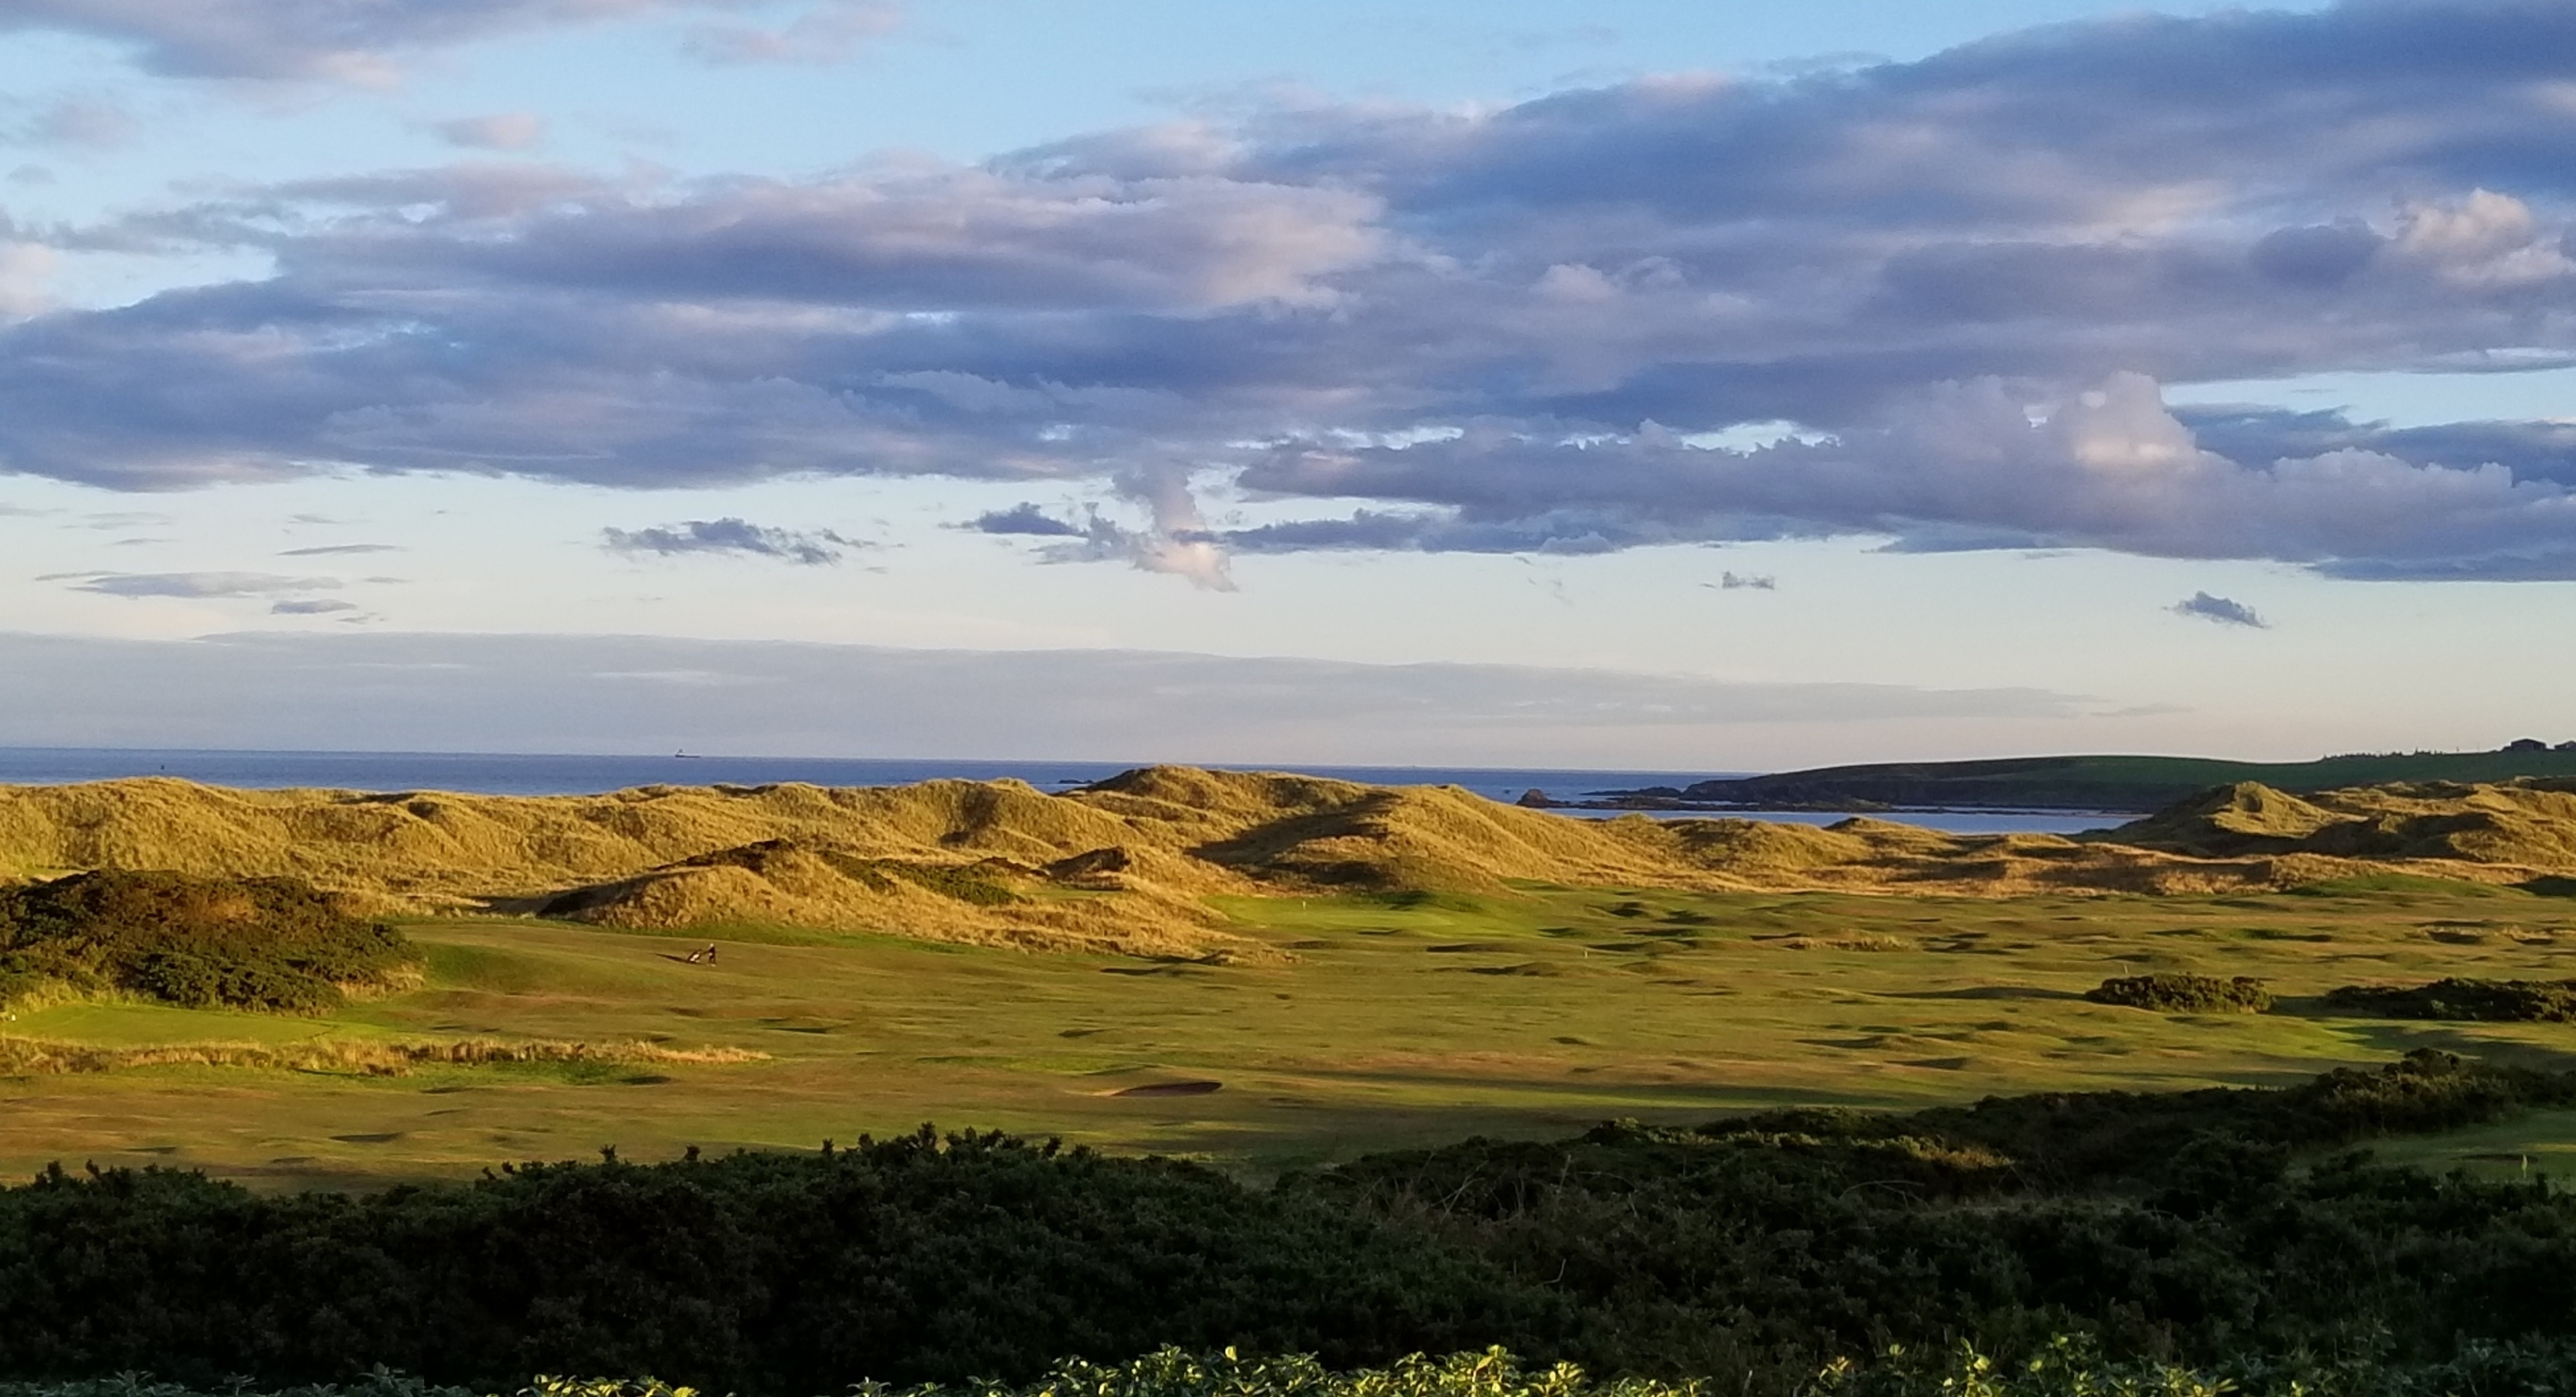 The gorgeous dunes of this golf course against the backdrop of cruden bay is truly a spectacular sight to behold